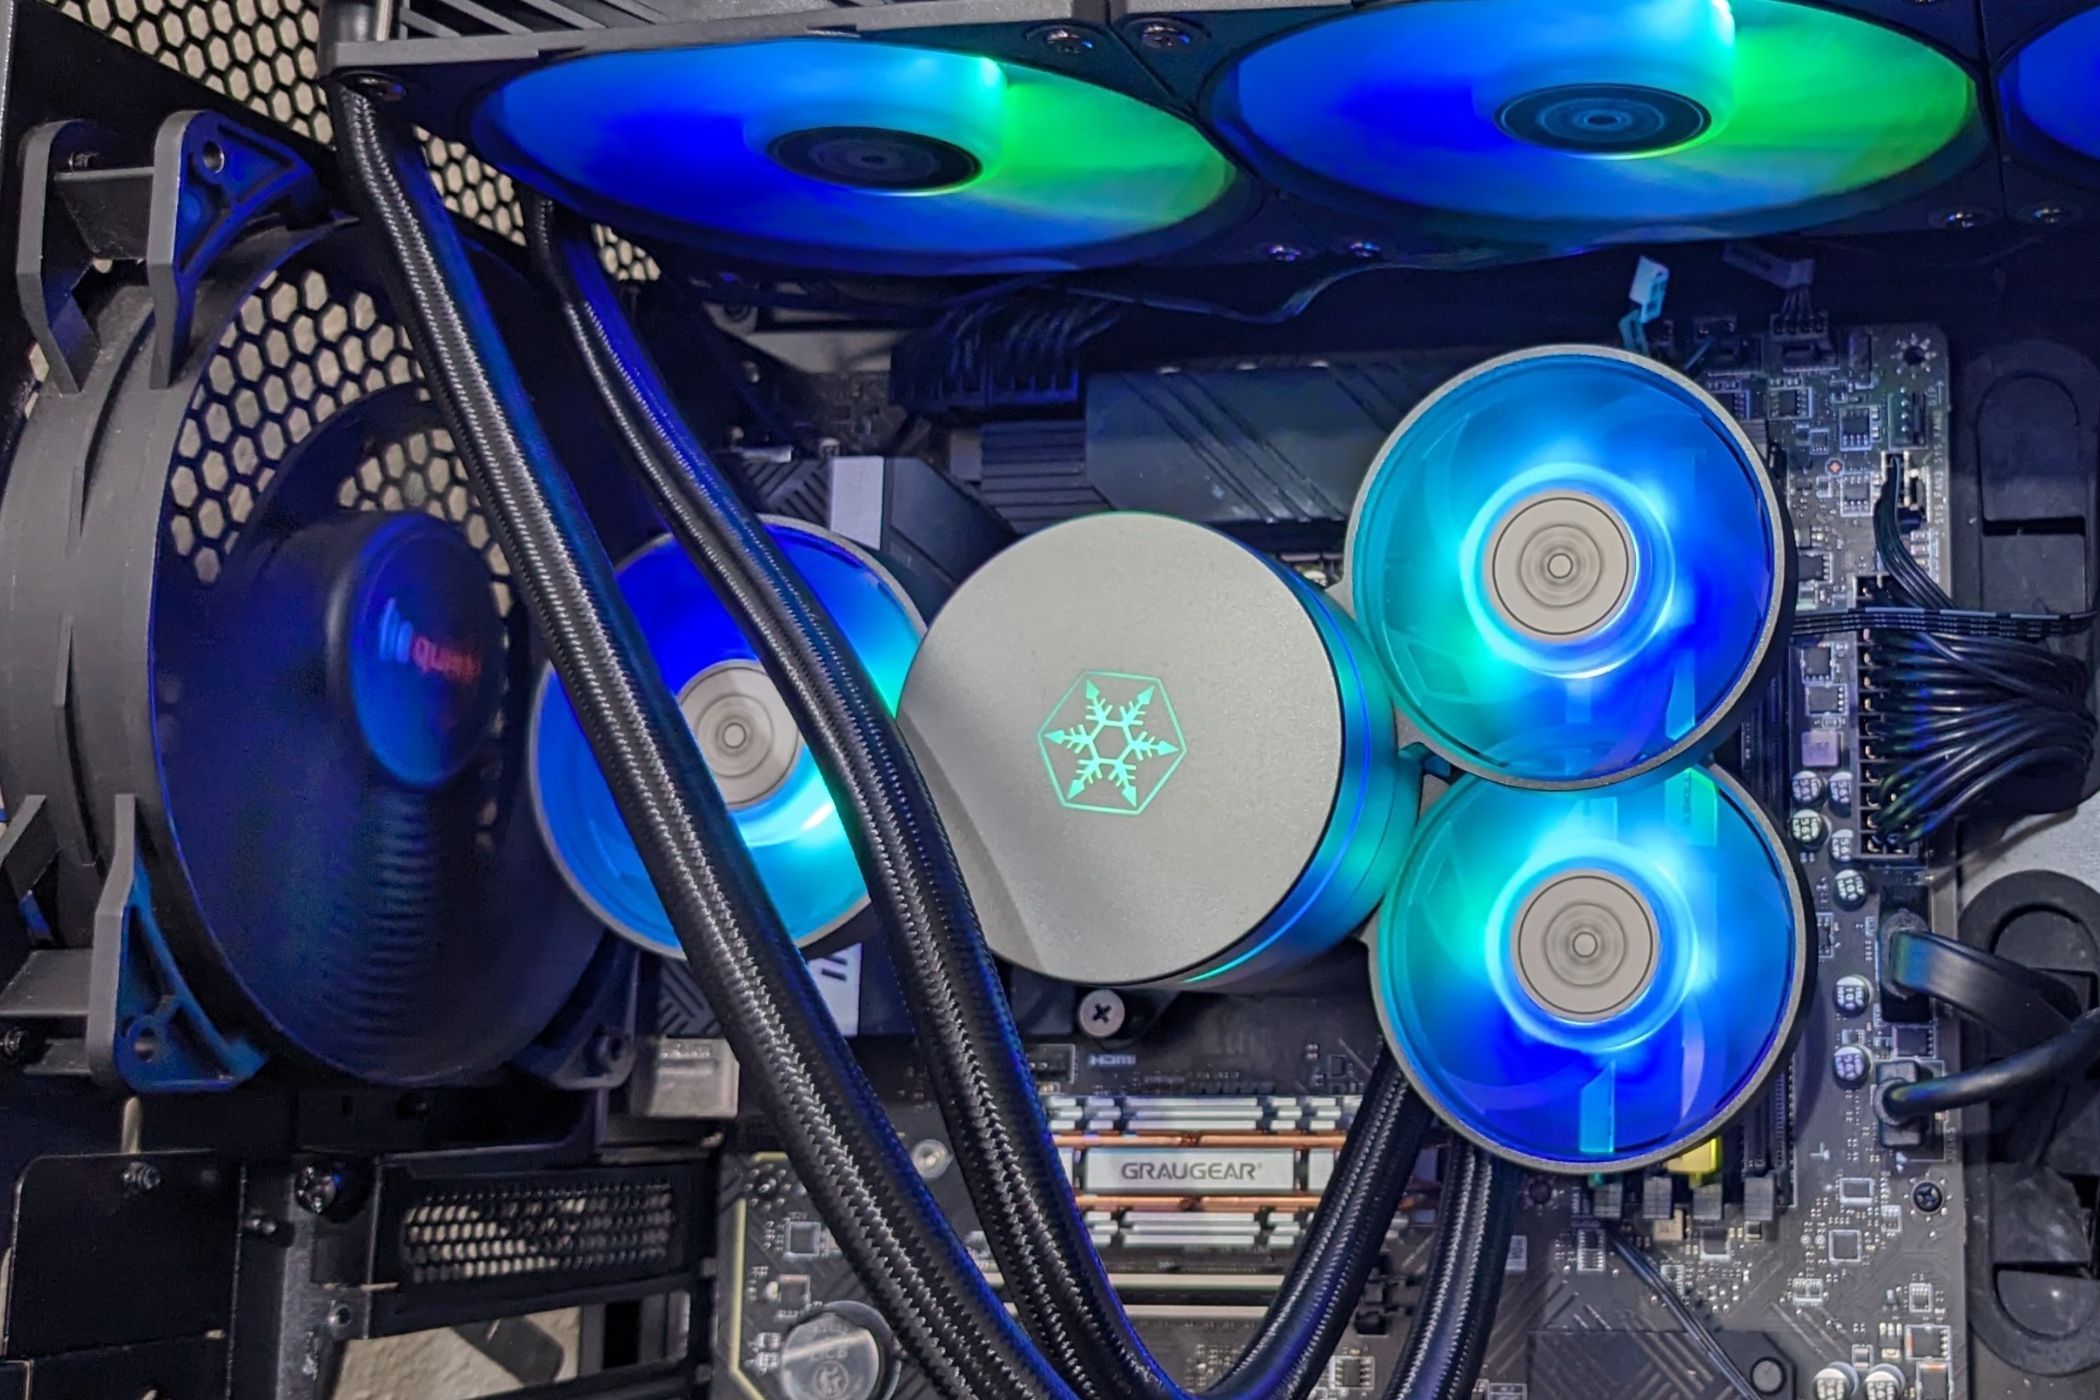 4 unique and exciting cooling components that will give your PC the chills